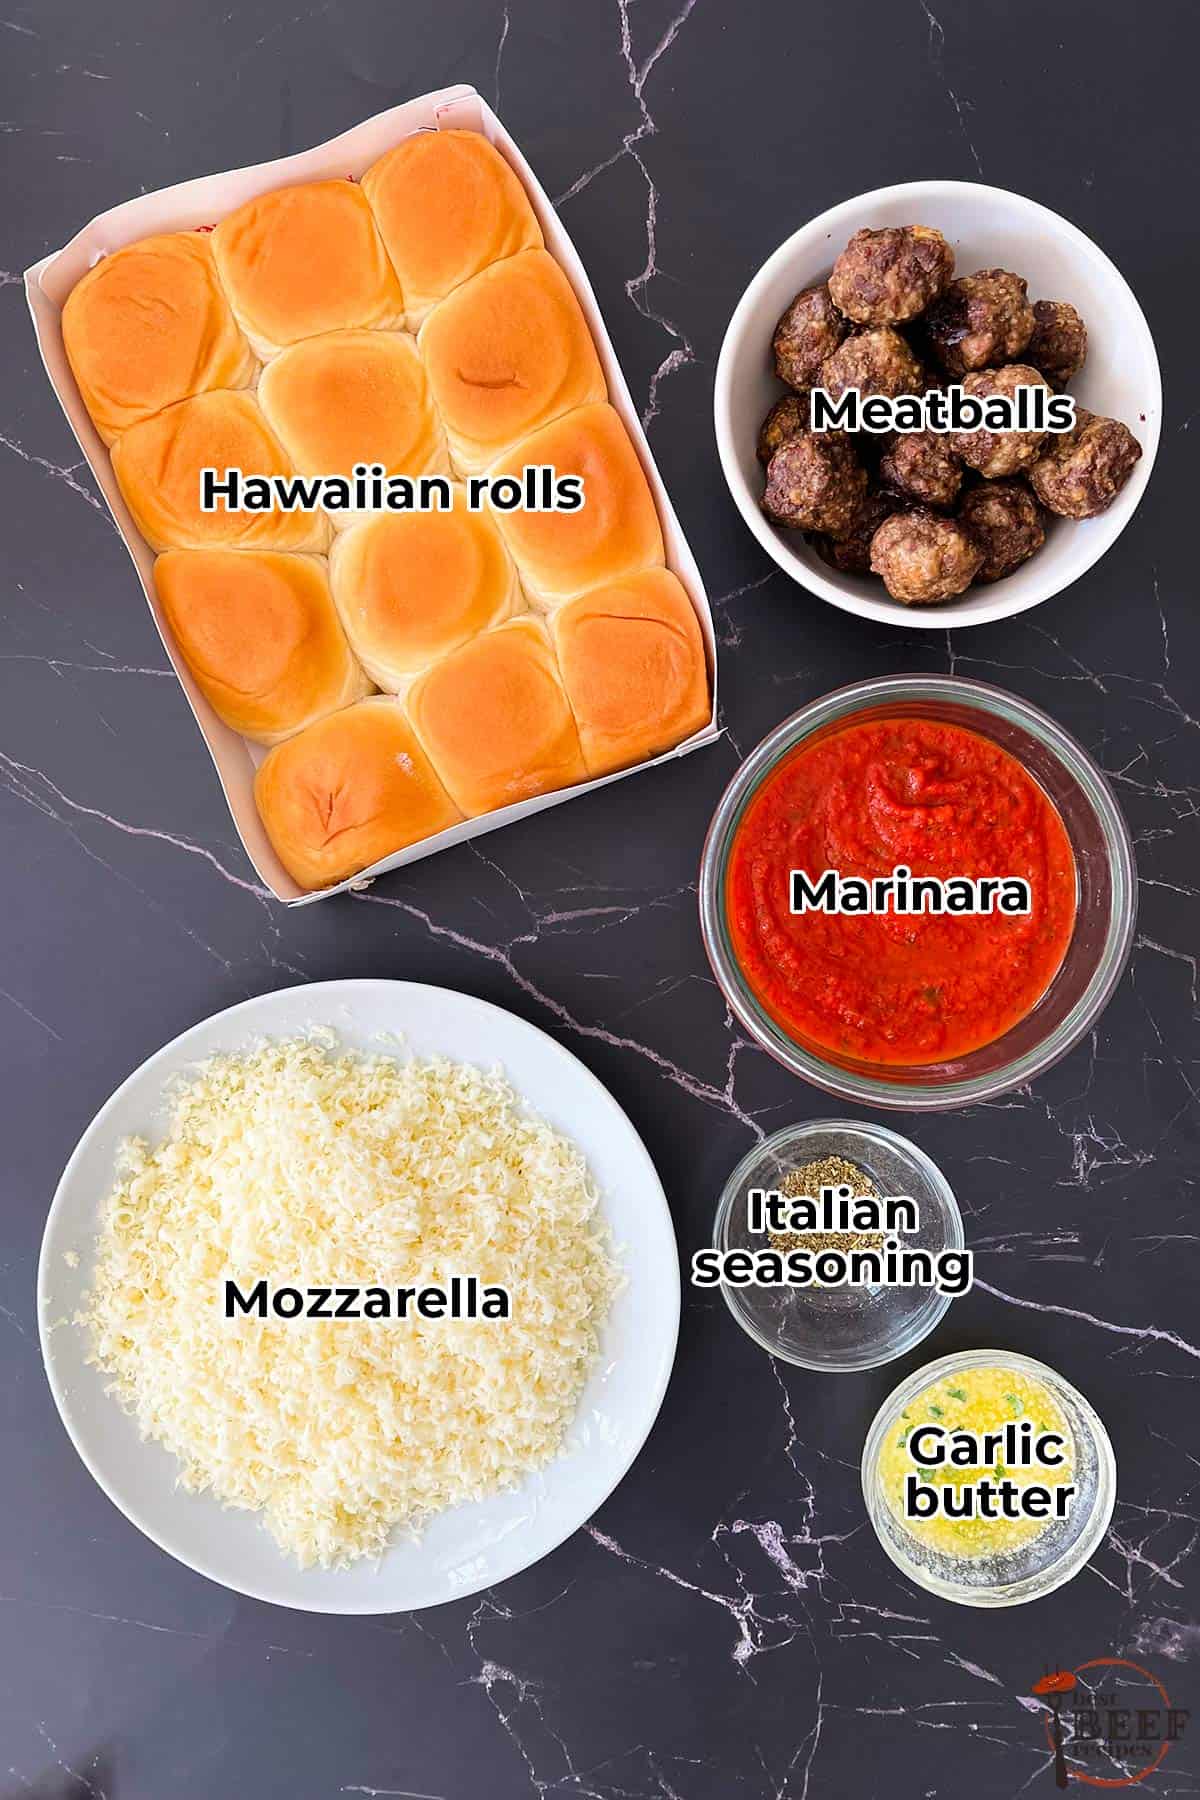 all the ingredients for meatball sliders in separate bowls with labels